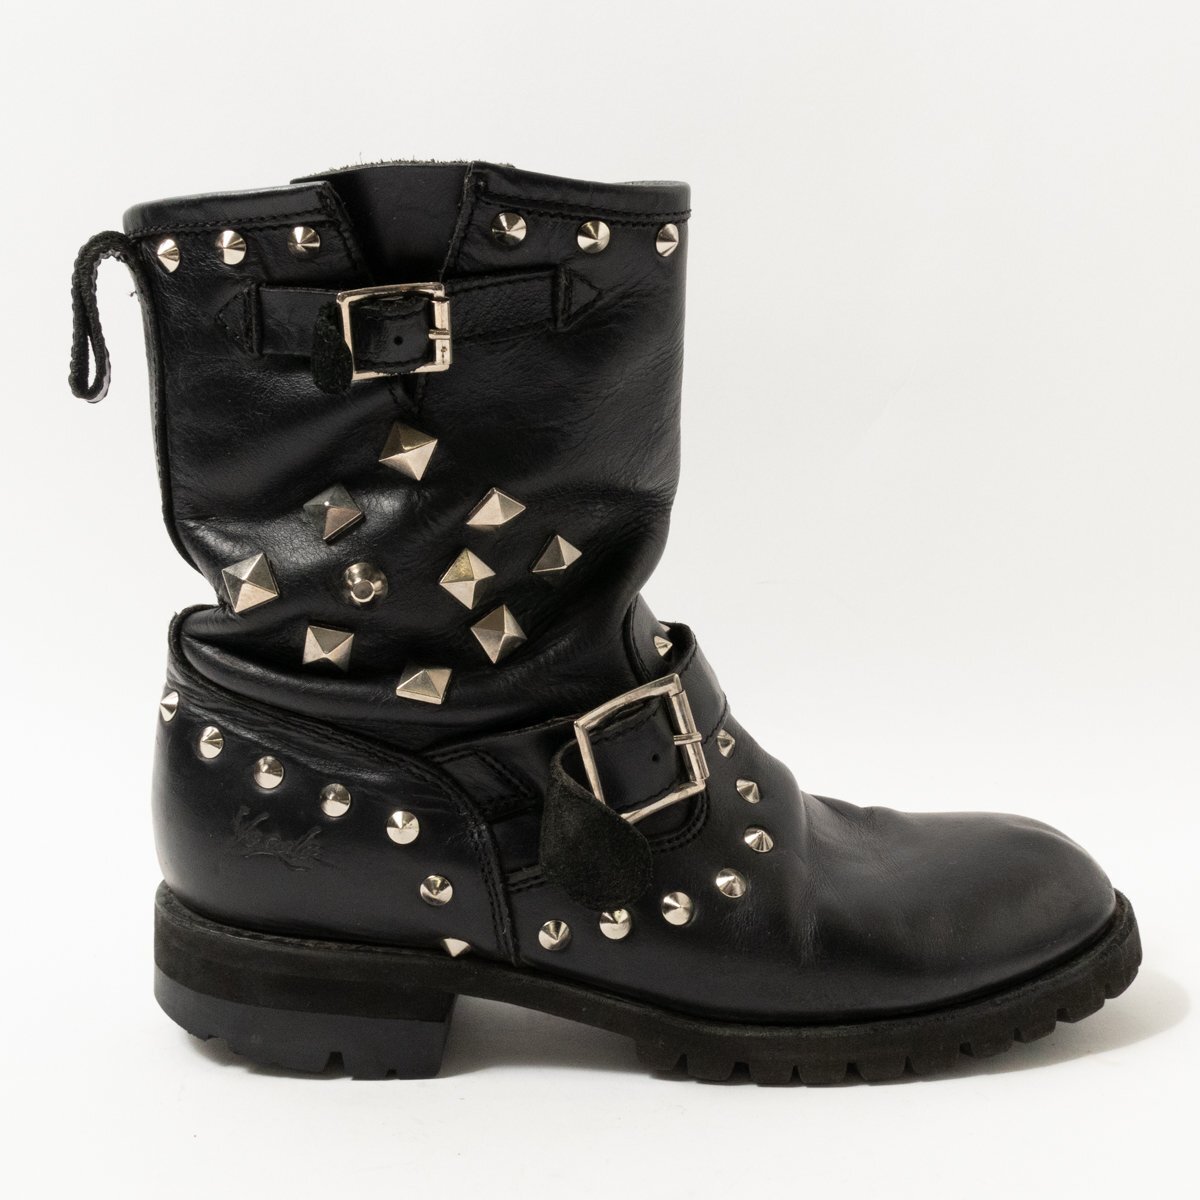 YOSUKEyo-ske engineer boots studs shoes middle height 25.0cm leather original leather black silver equipment ornament casual gran ji Street 